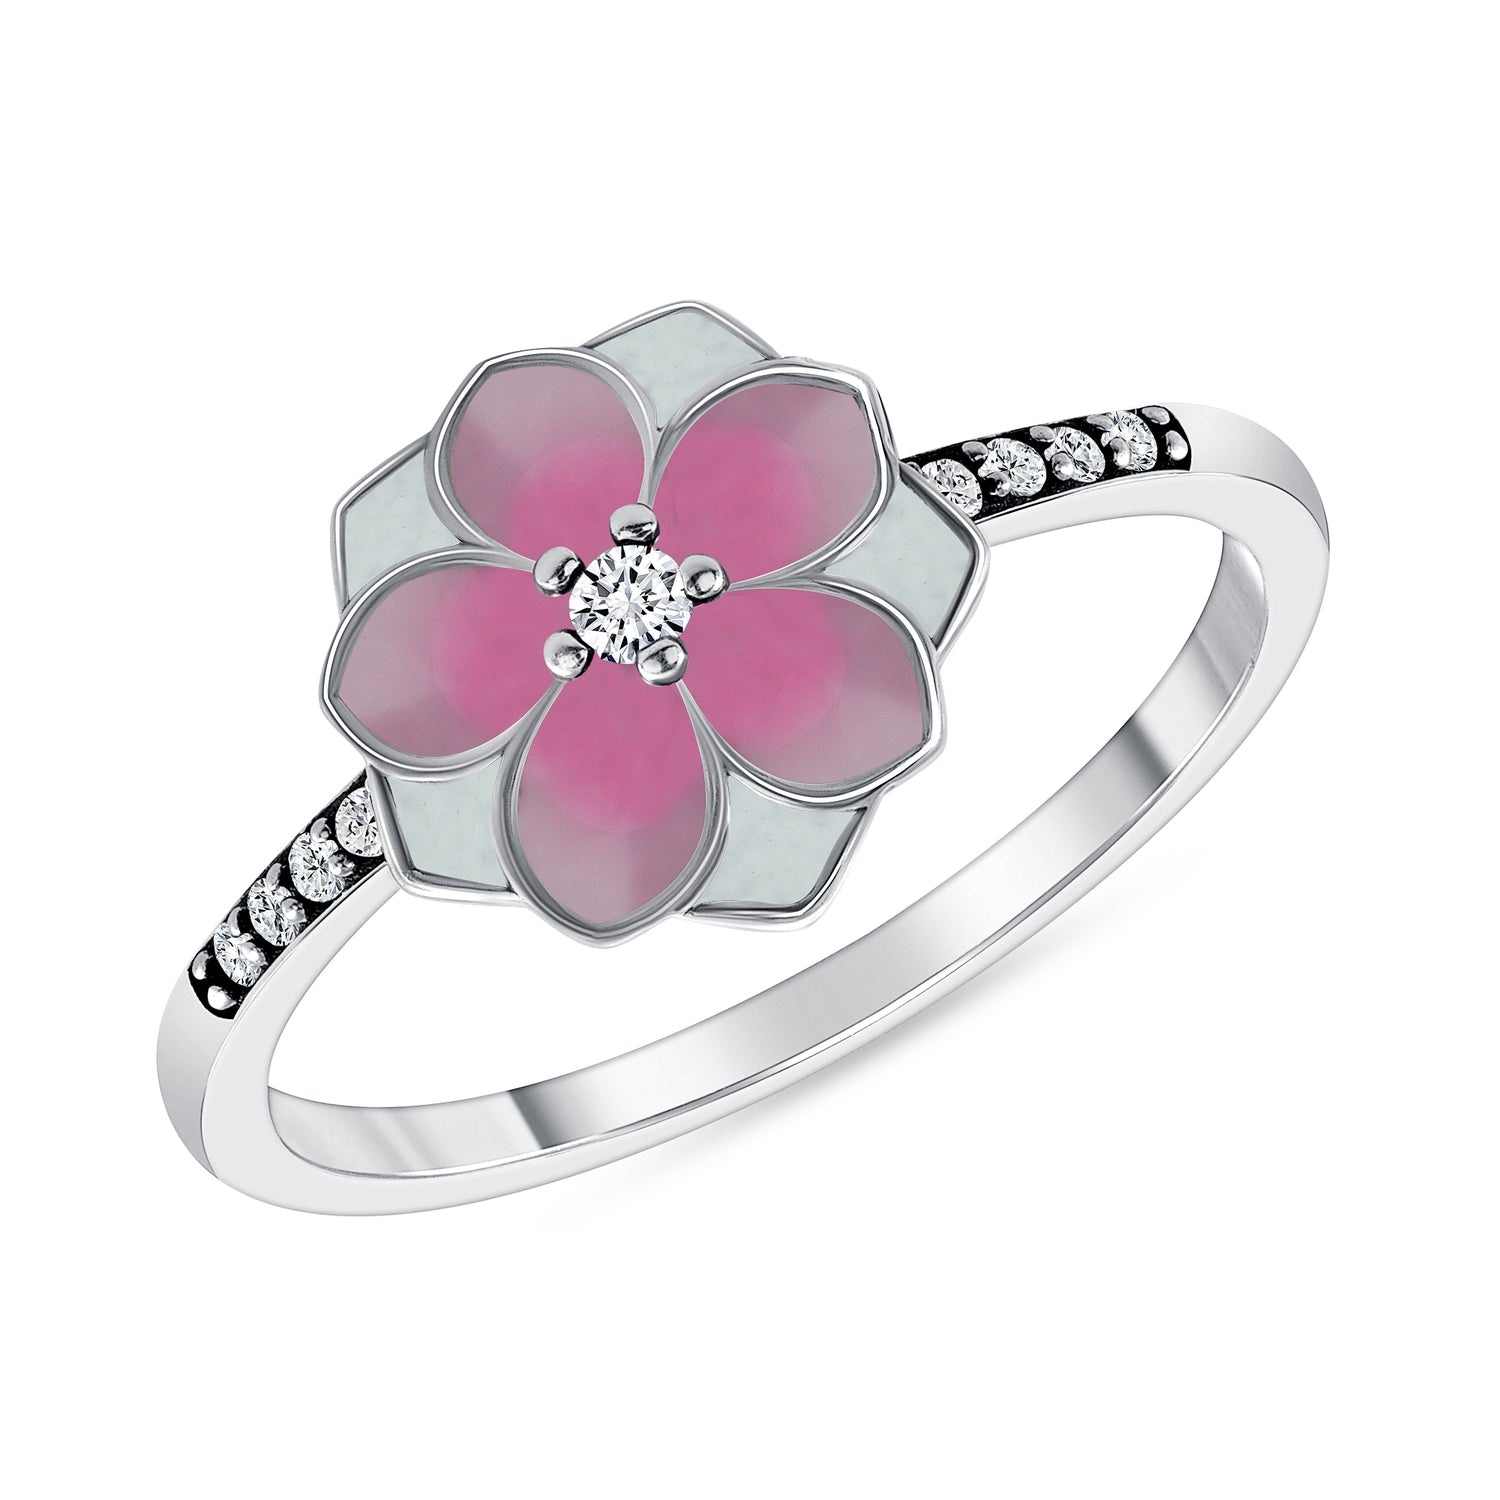 Silver 925 Rhodium Plated White and Pink Flower Enamel Ring. R10211 ...